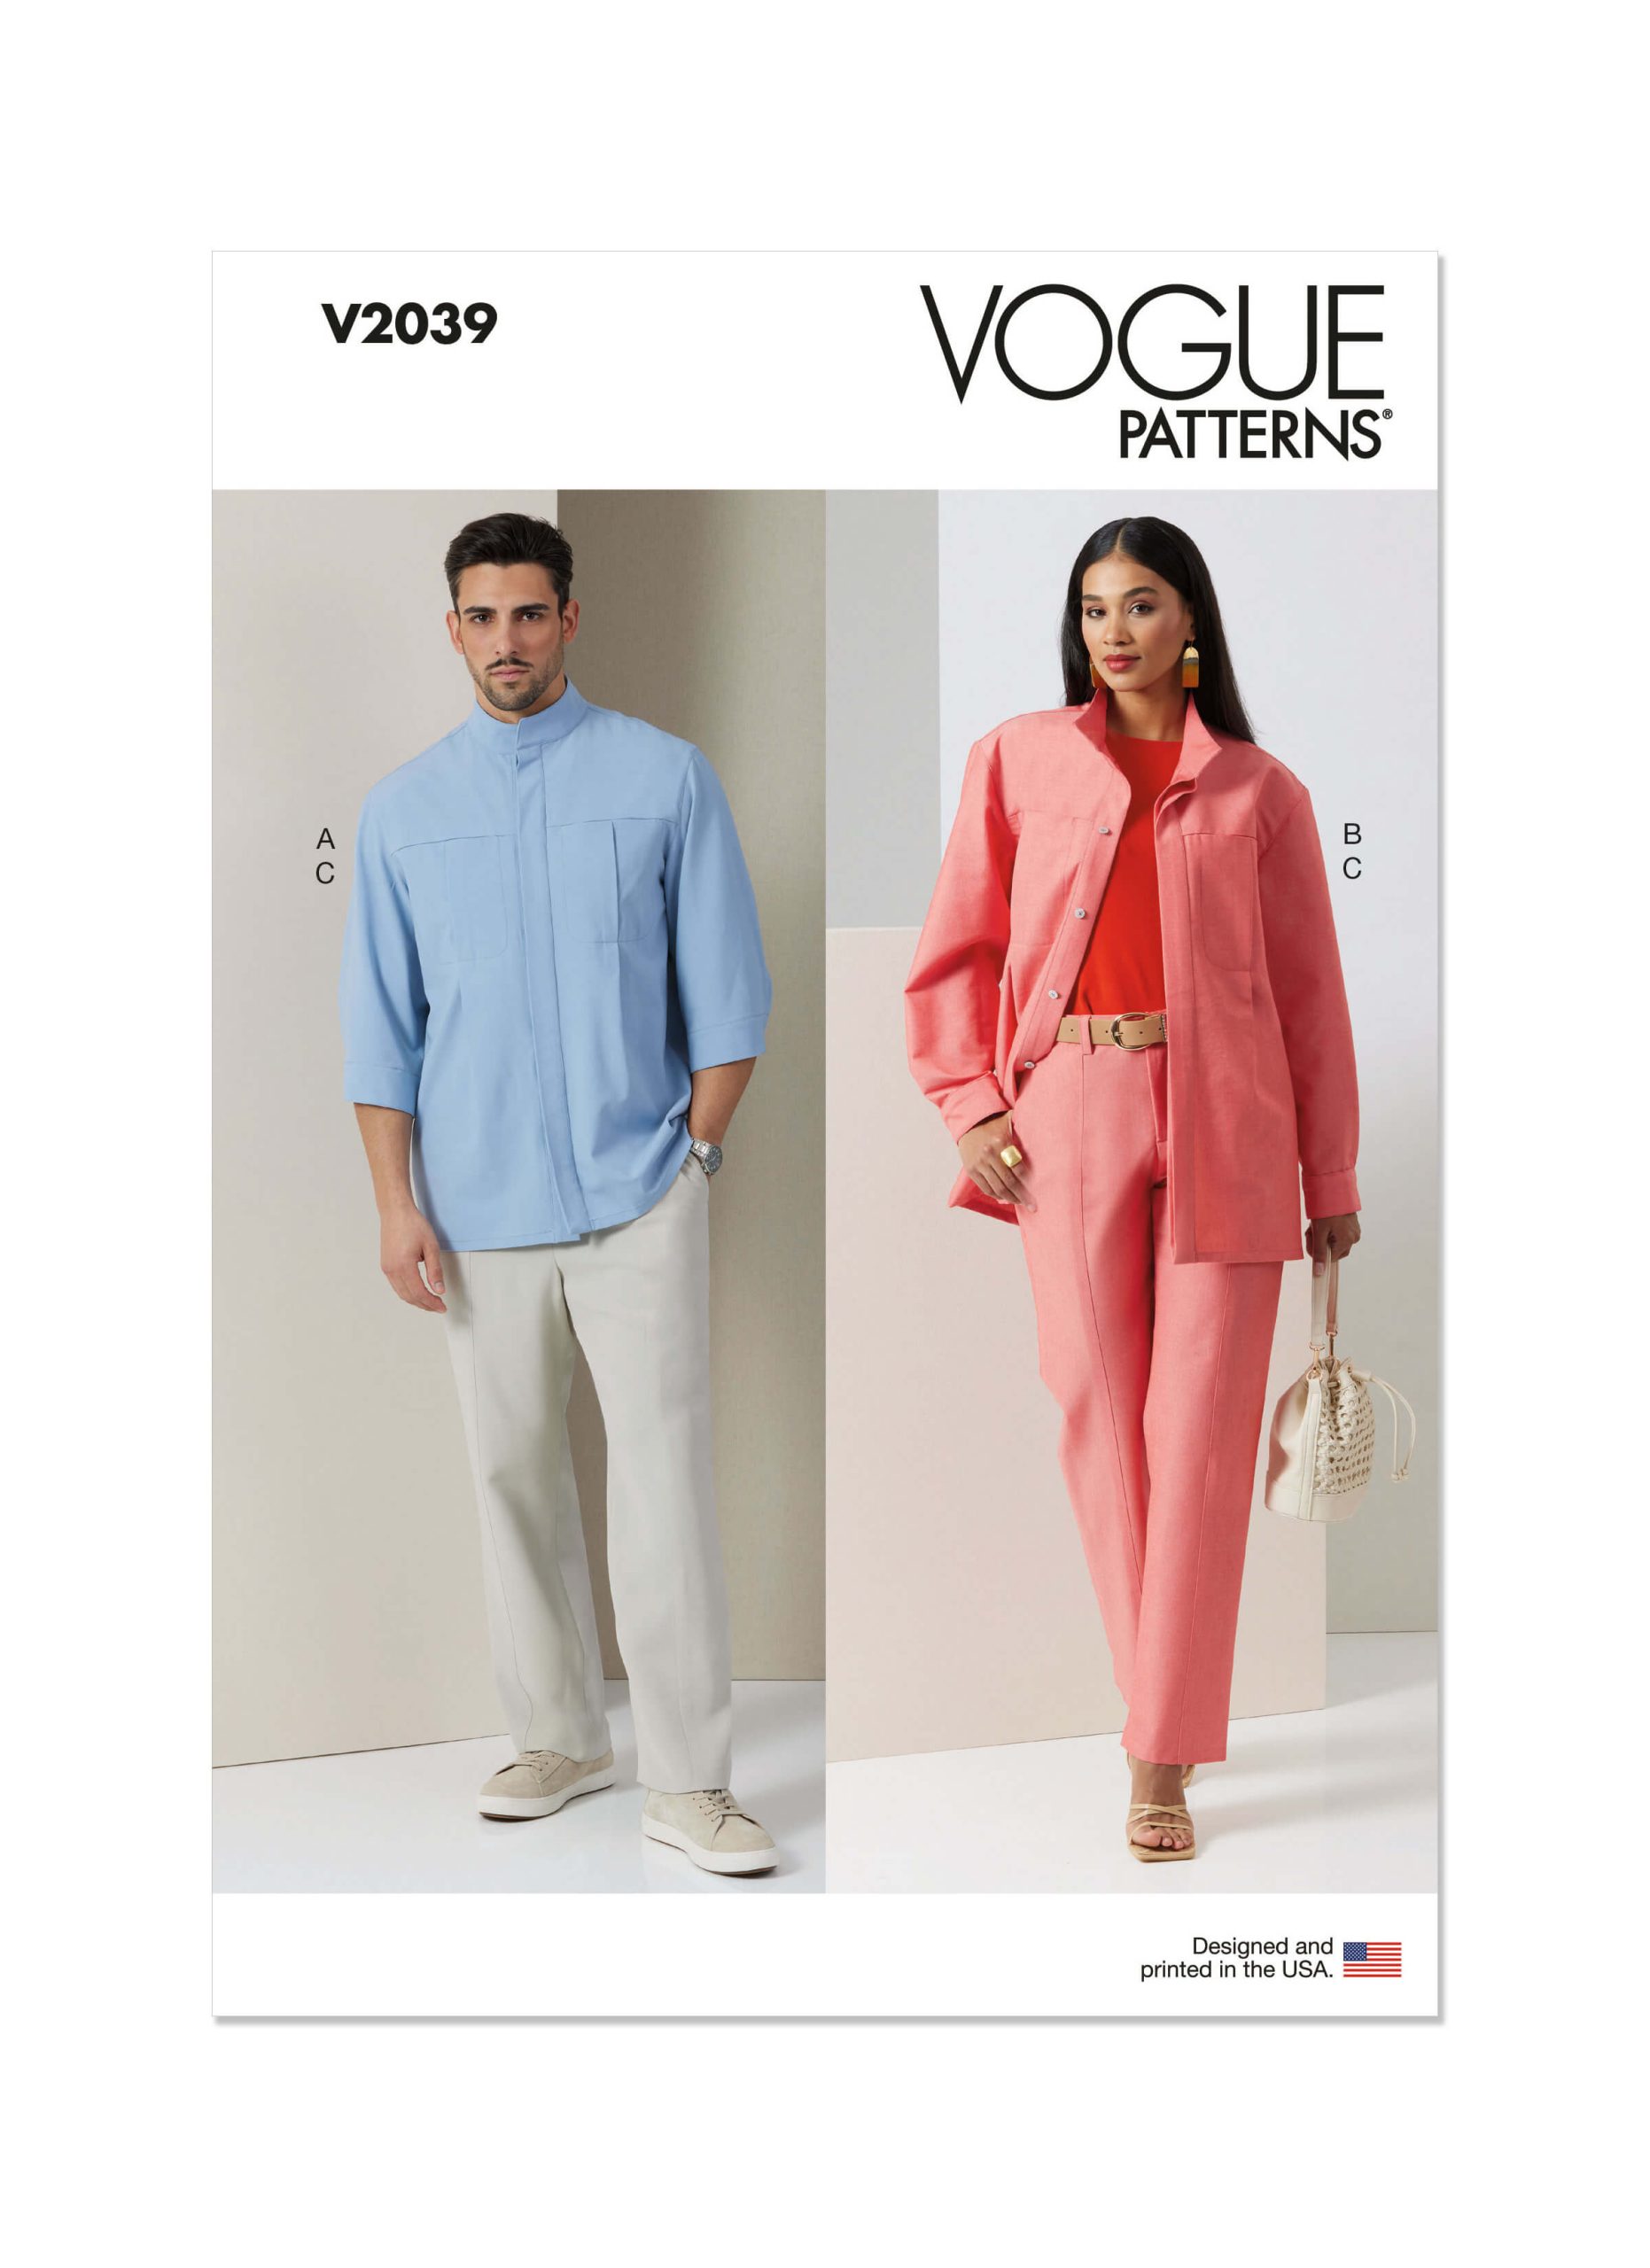 Vogue Patterns V2039 Unisex Shirt and Trousers